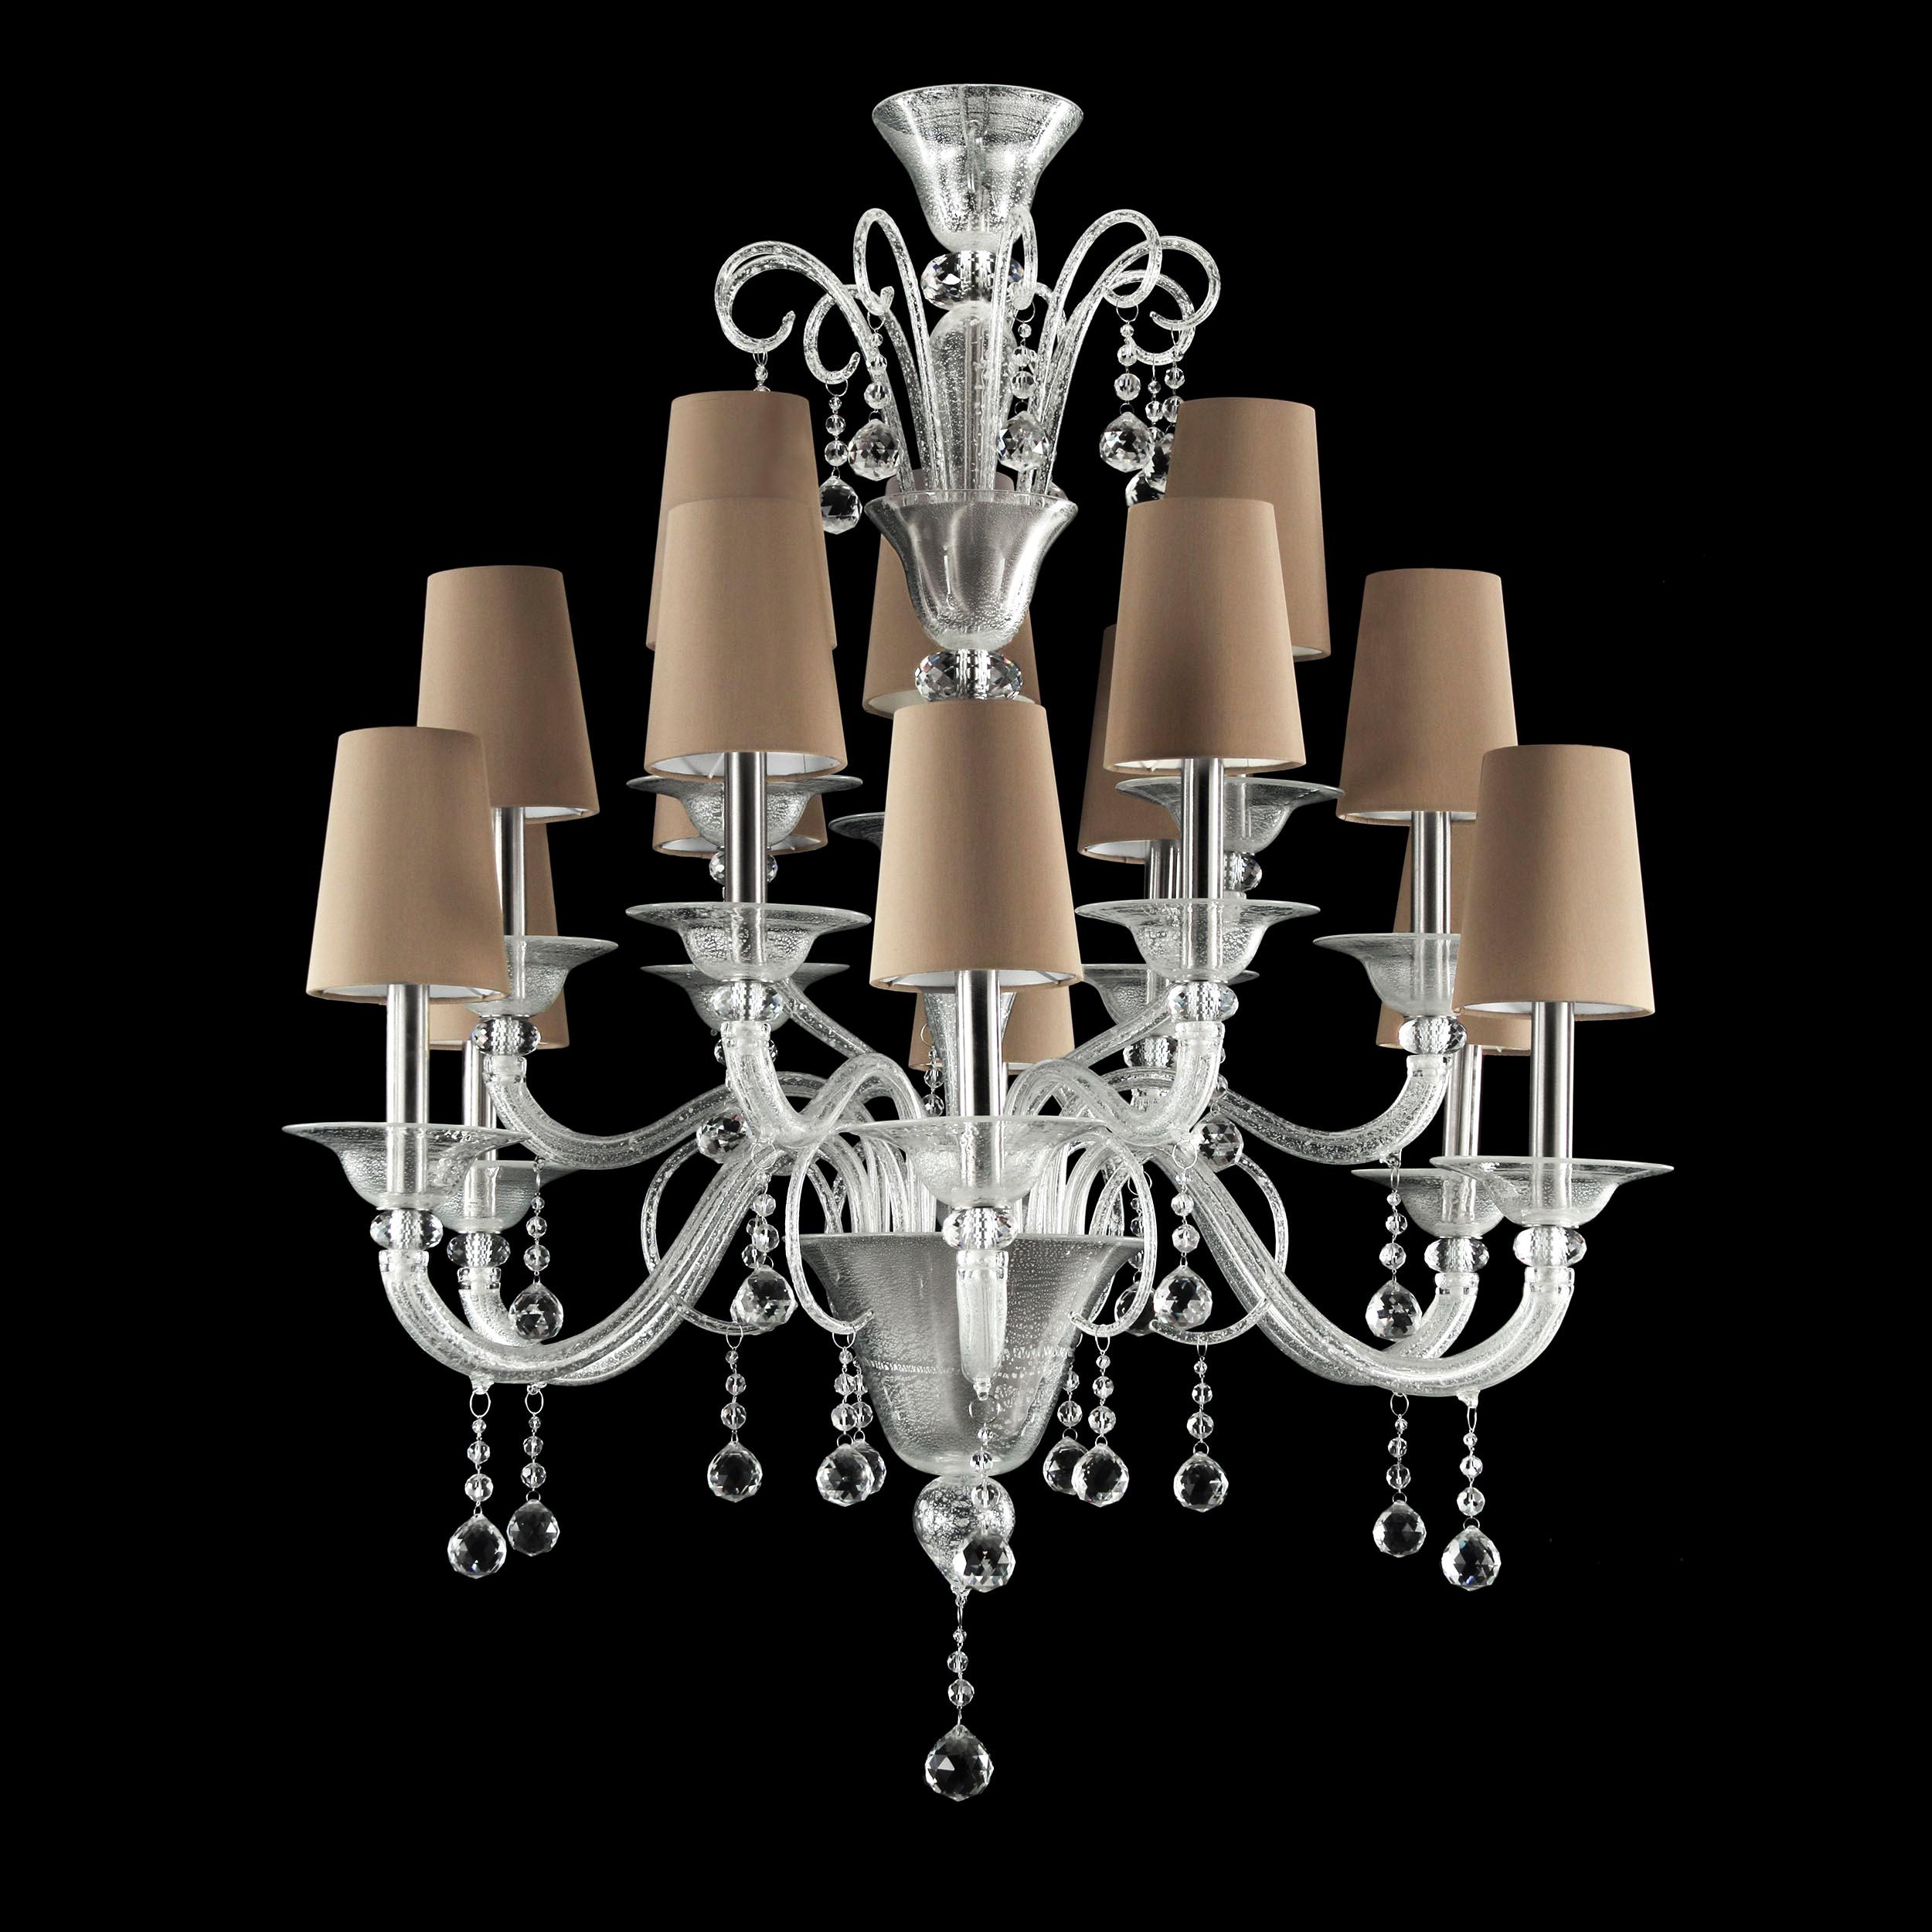 The luxury chandelier THE MOON is characterised by glass elements, curls, Swarovski® pendants and fabric lampshades. The arms and curls are in clear glass with silver leaf, the pendants in cut crystal and the lampshades are made from a refined cream